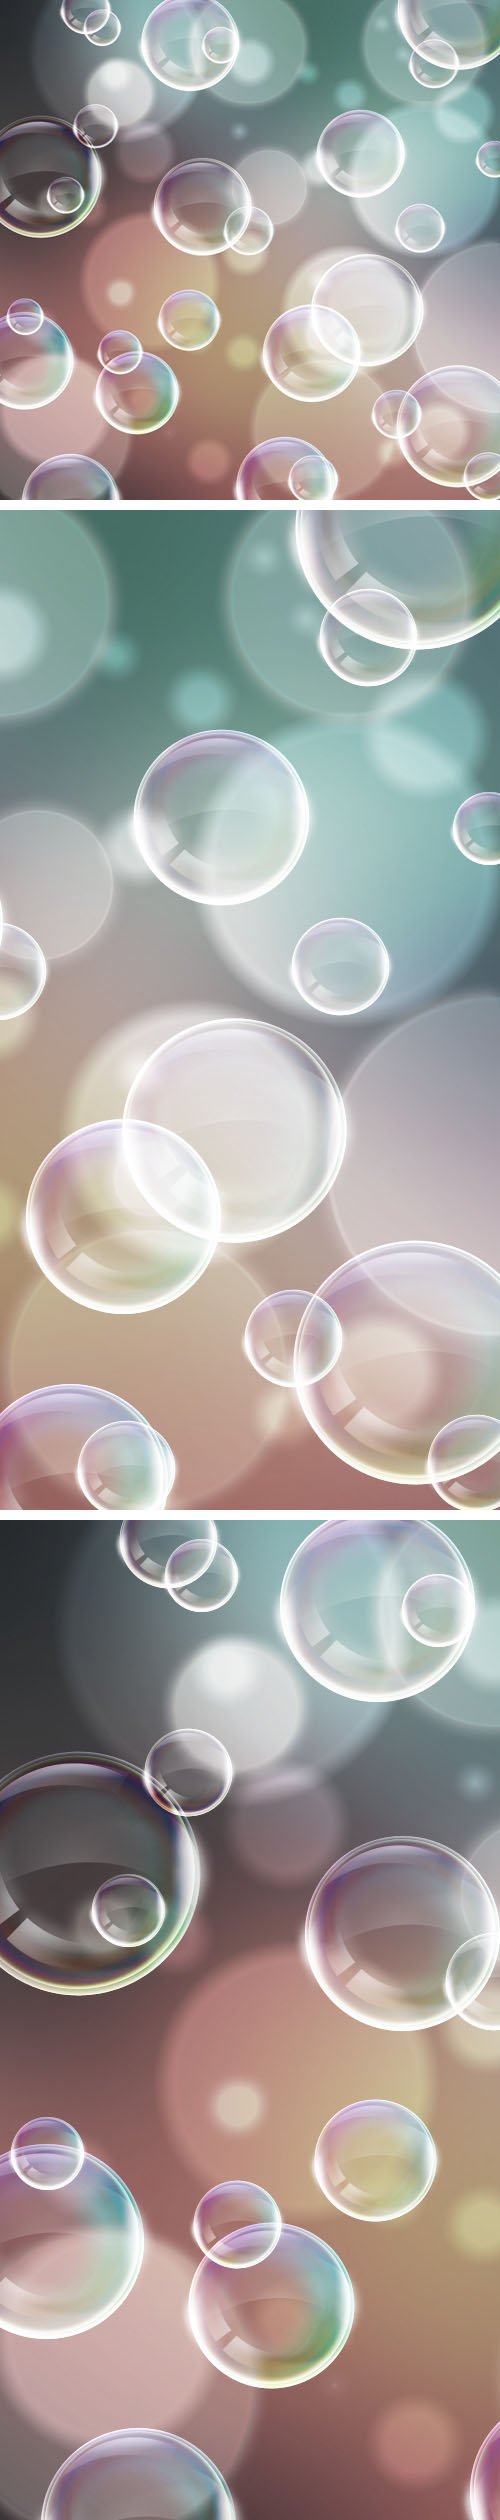 Realistic Magical Water Bubbles PSD Template